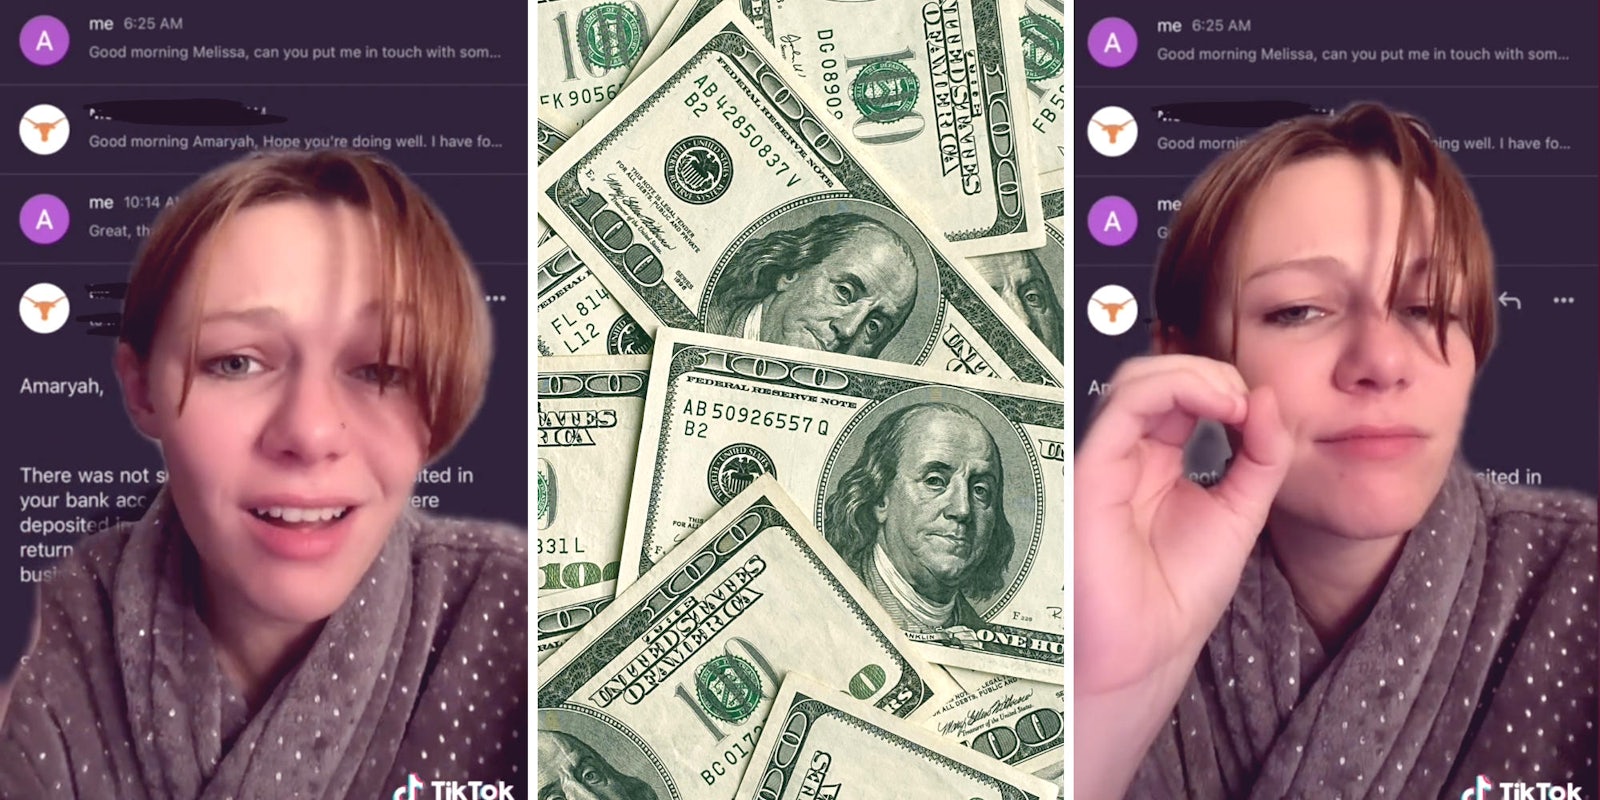 woman looking disappointed in front of phone messages (l) (r) photo of dollar bills (m)